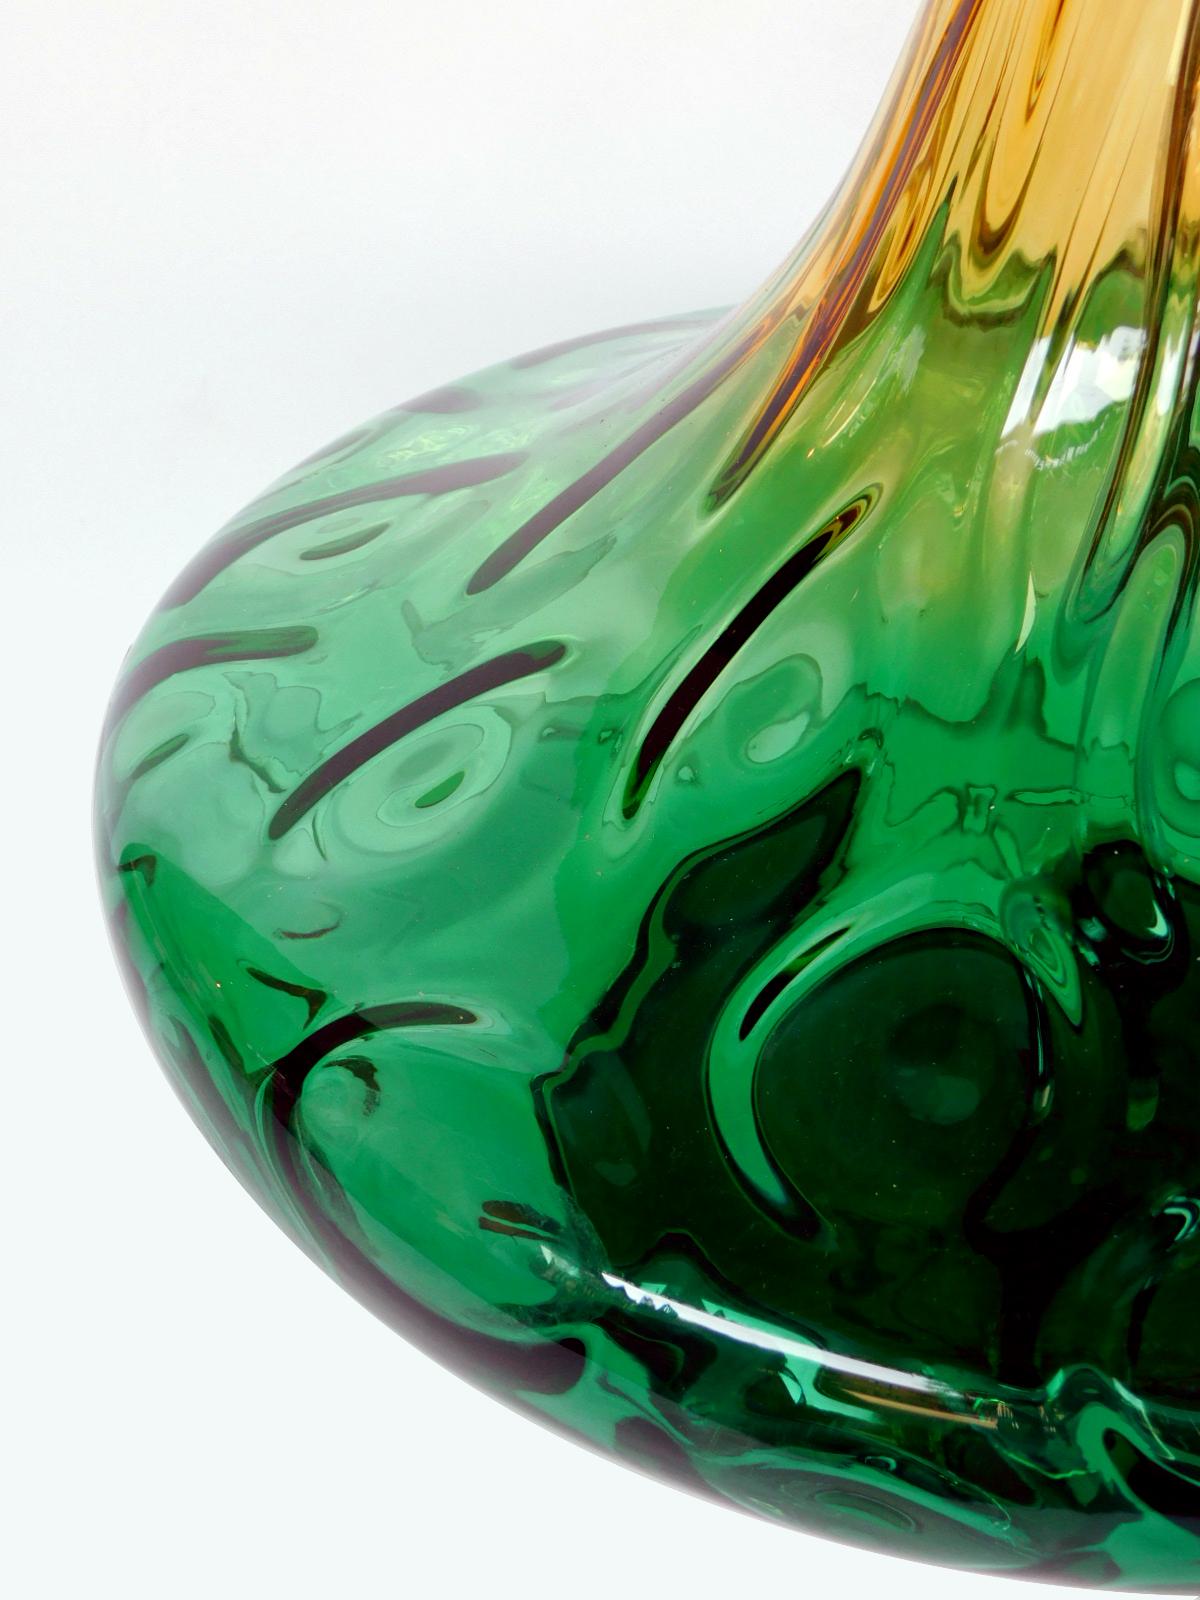 Each of decanter form with long flaring neck above a compressed spheroid body; all in a graduated yellow-to-green clear glass infused with large bubbles; 16.5